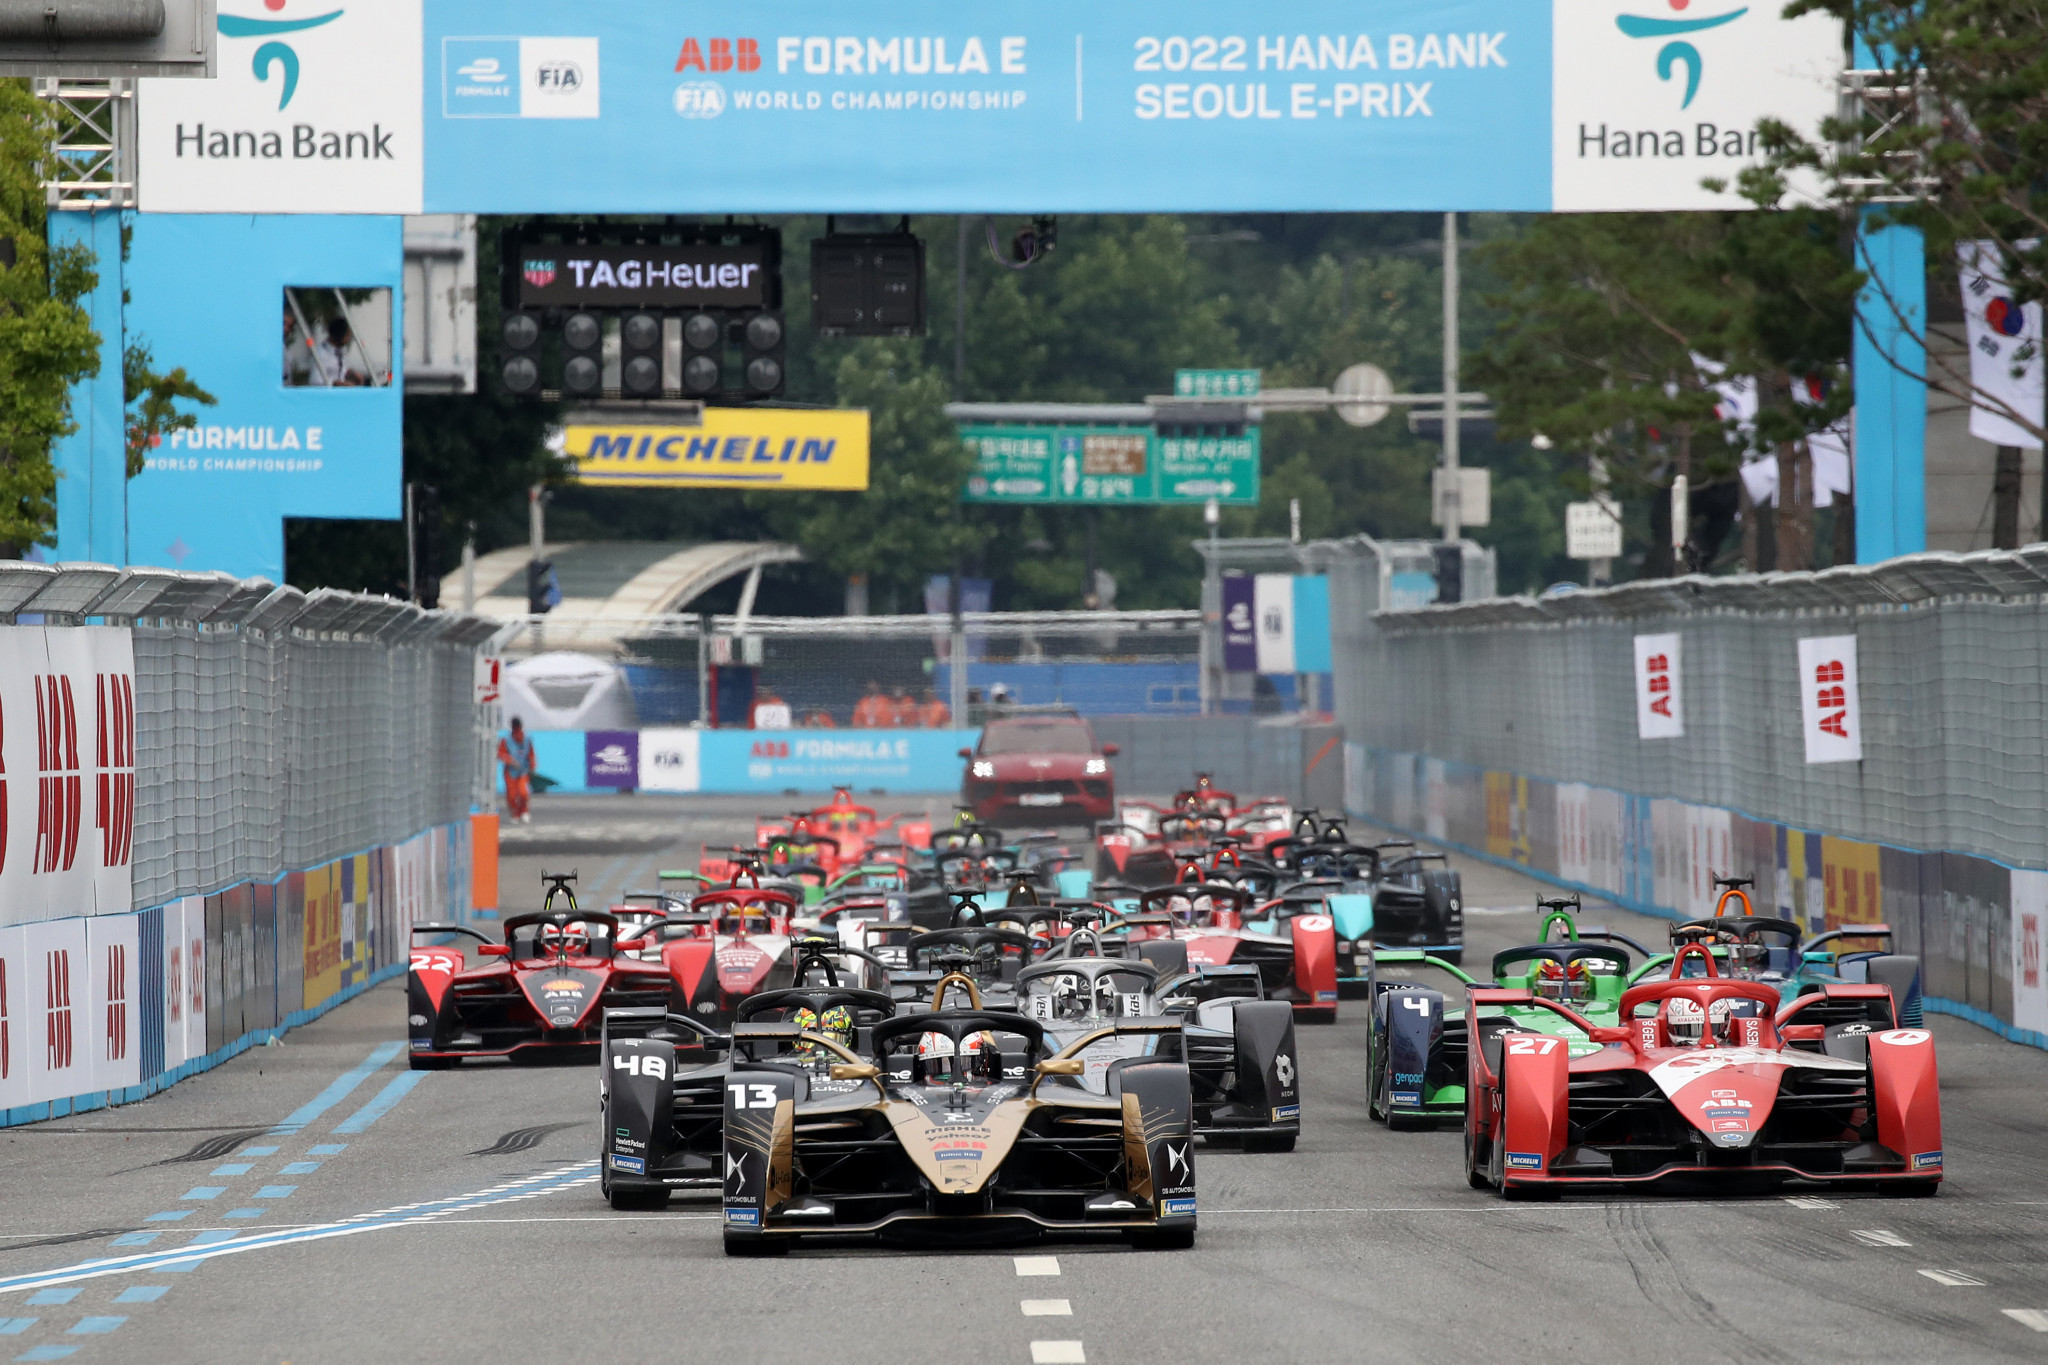 The 2023 Formula E season is set to begin on January 14 using the more environmentally friendly Gen3 cars ©Getty Images